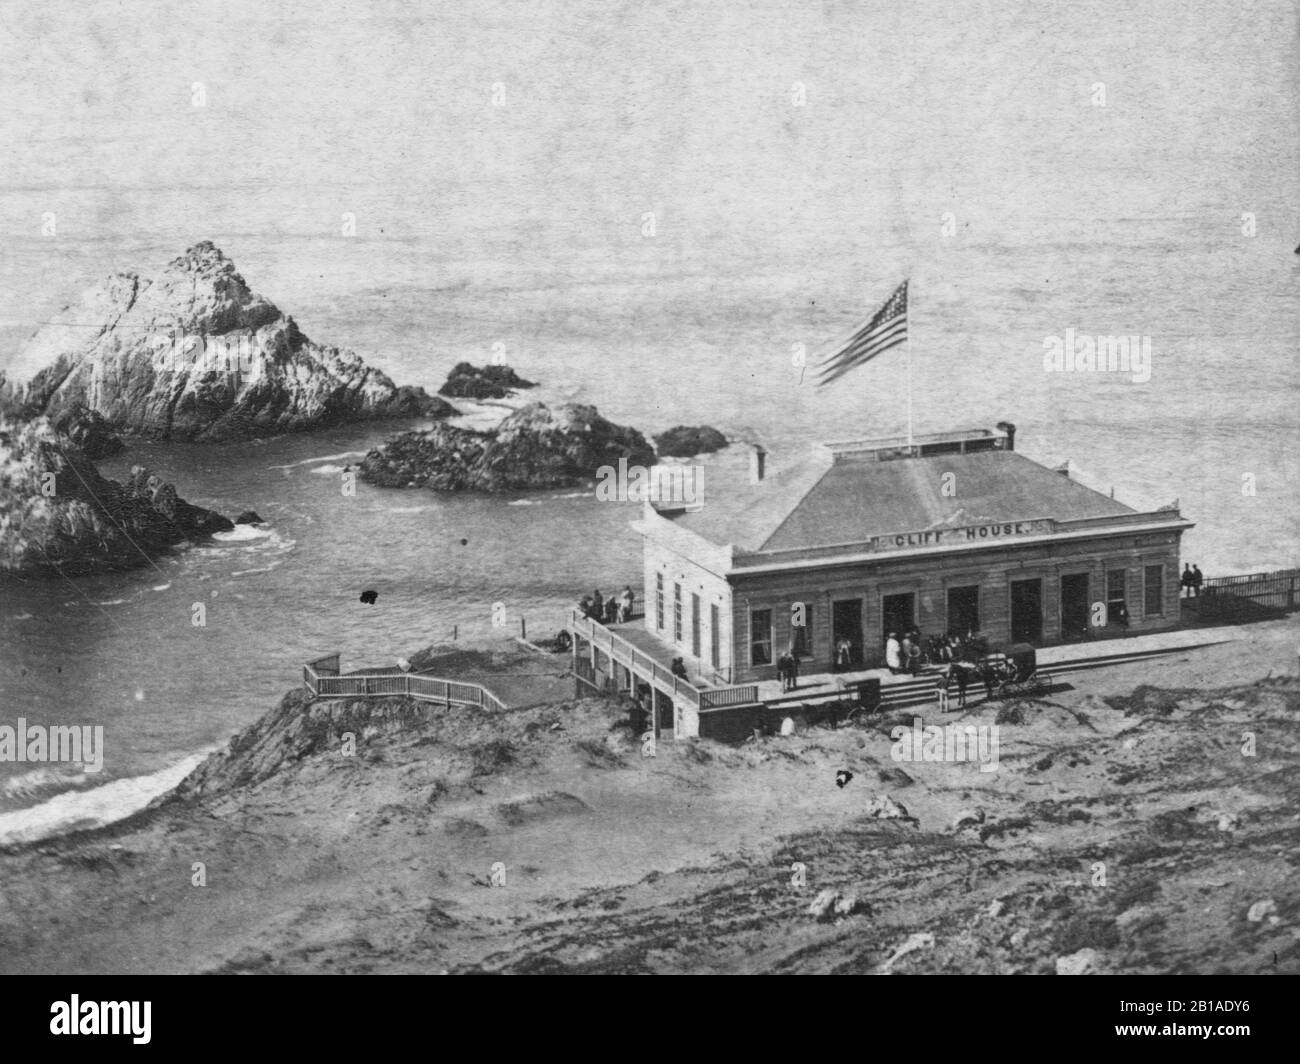 Cliff House, San Francisco, California, USA, 1870s. This is the second building of this name, built in 1863. Since this second house, the Cliff House has been rebuilt four more times over the last 150 years. This house has been a big tourist attraction since early on. The first ever ship-to-shore Morse Code transmission was received in this house in 1899.   To see my other Places-related vintage images, Search:  Prestor  vintage  places  west Stock Photo